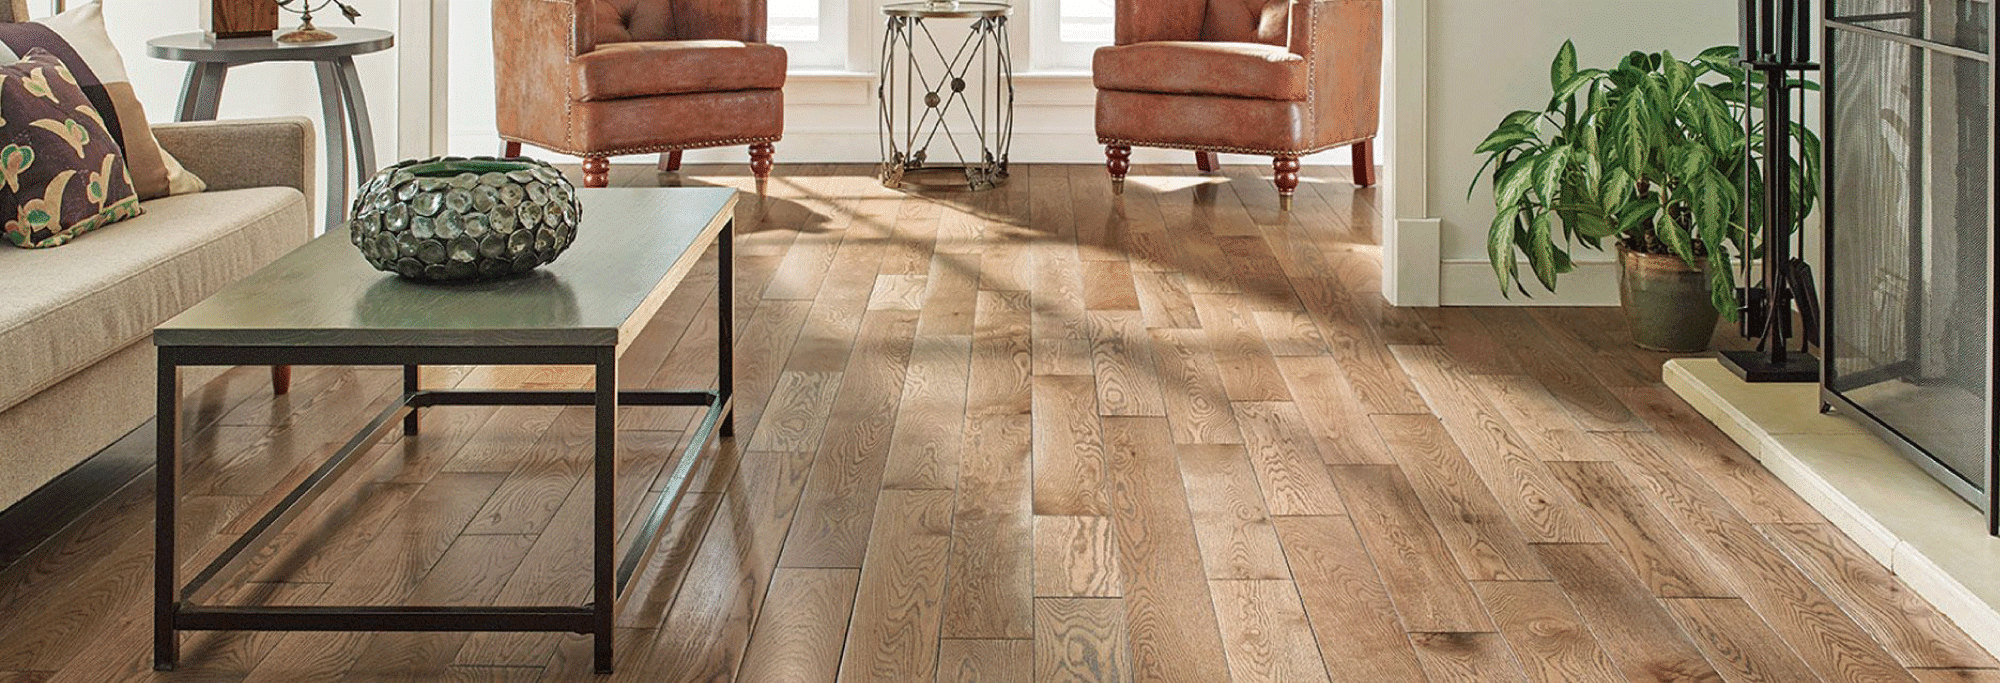 American Flooring | Flooring Experts Serving The Tampa Area